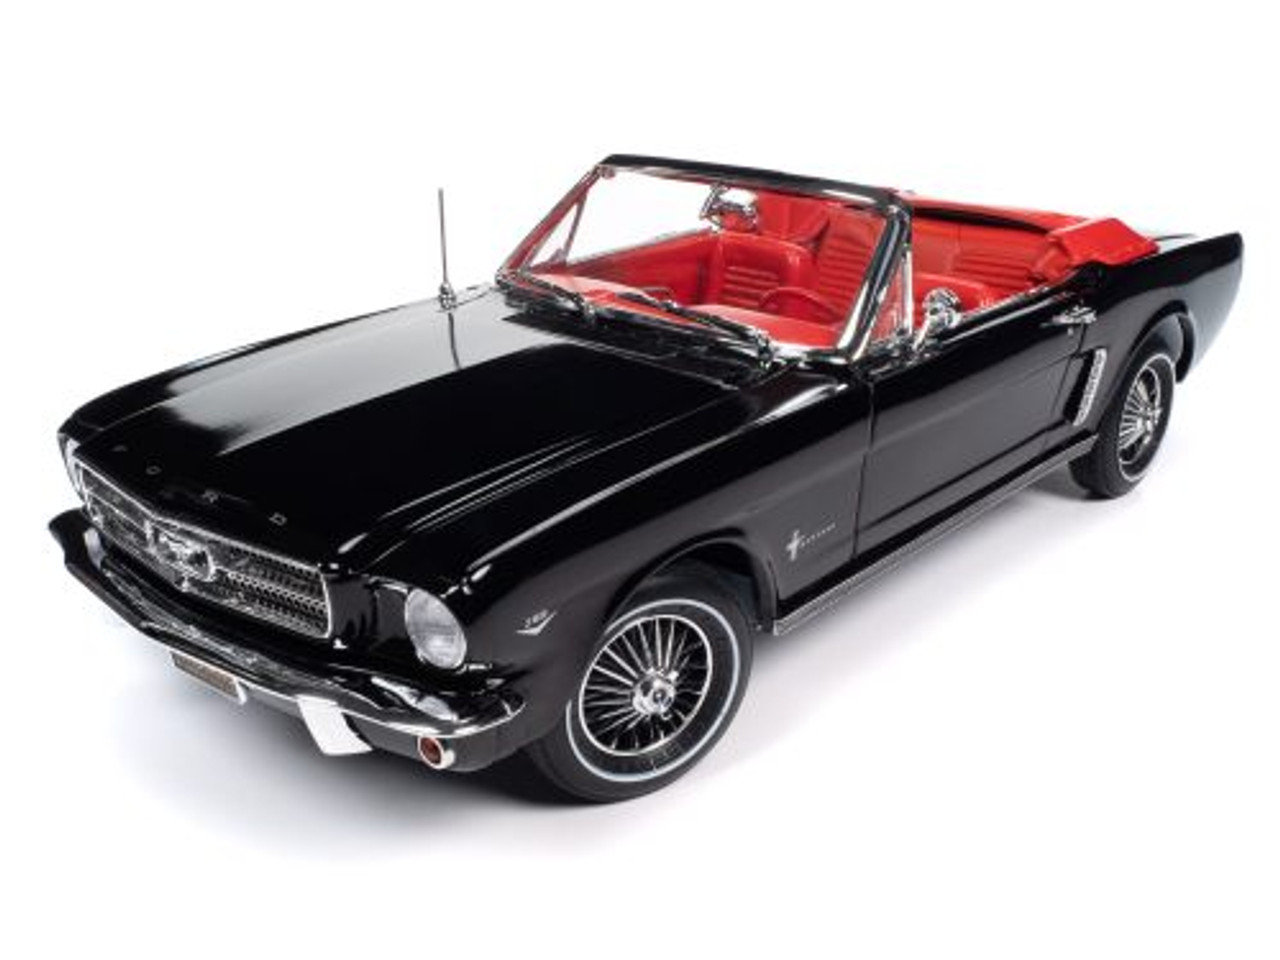 American Muscle 1312 1/18 1964.5 Ford Mustang Convertible Diecast